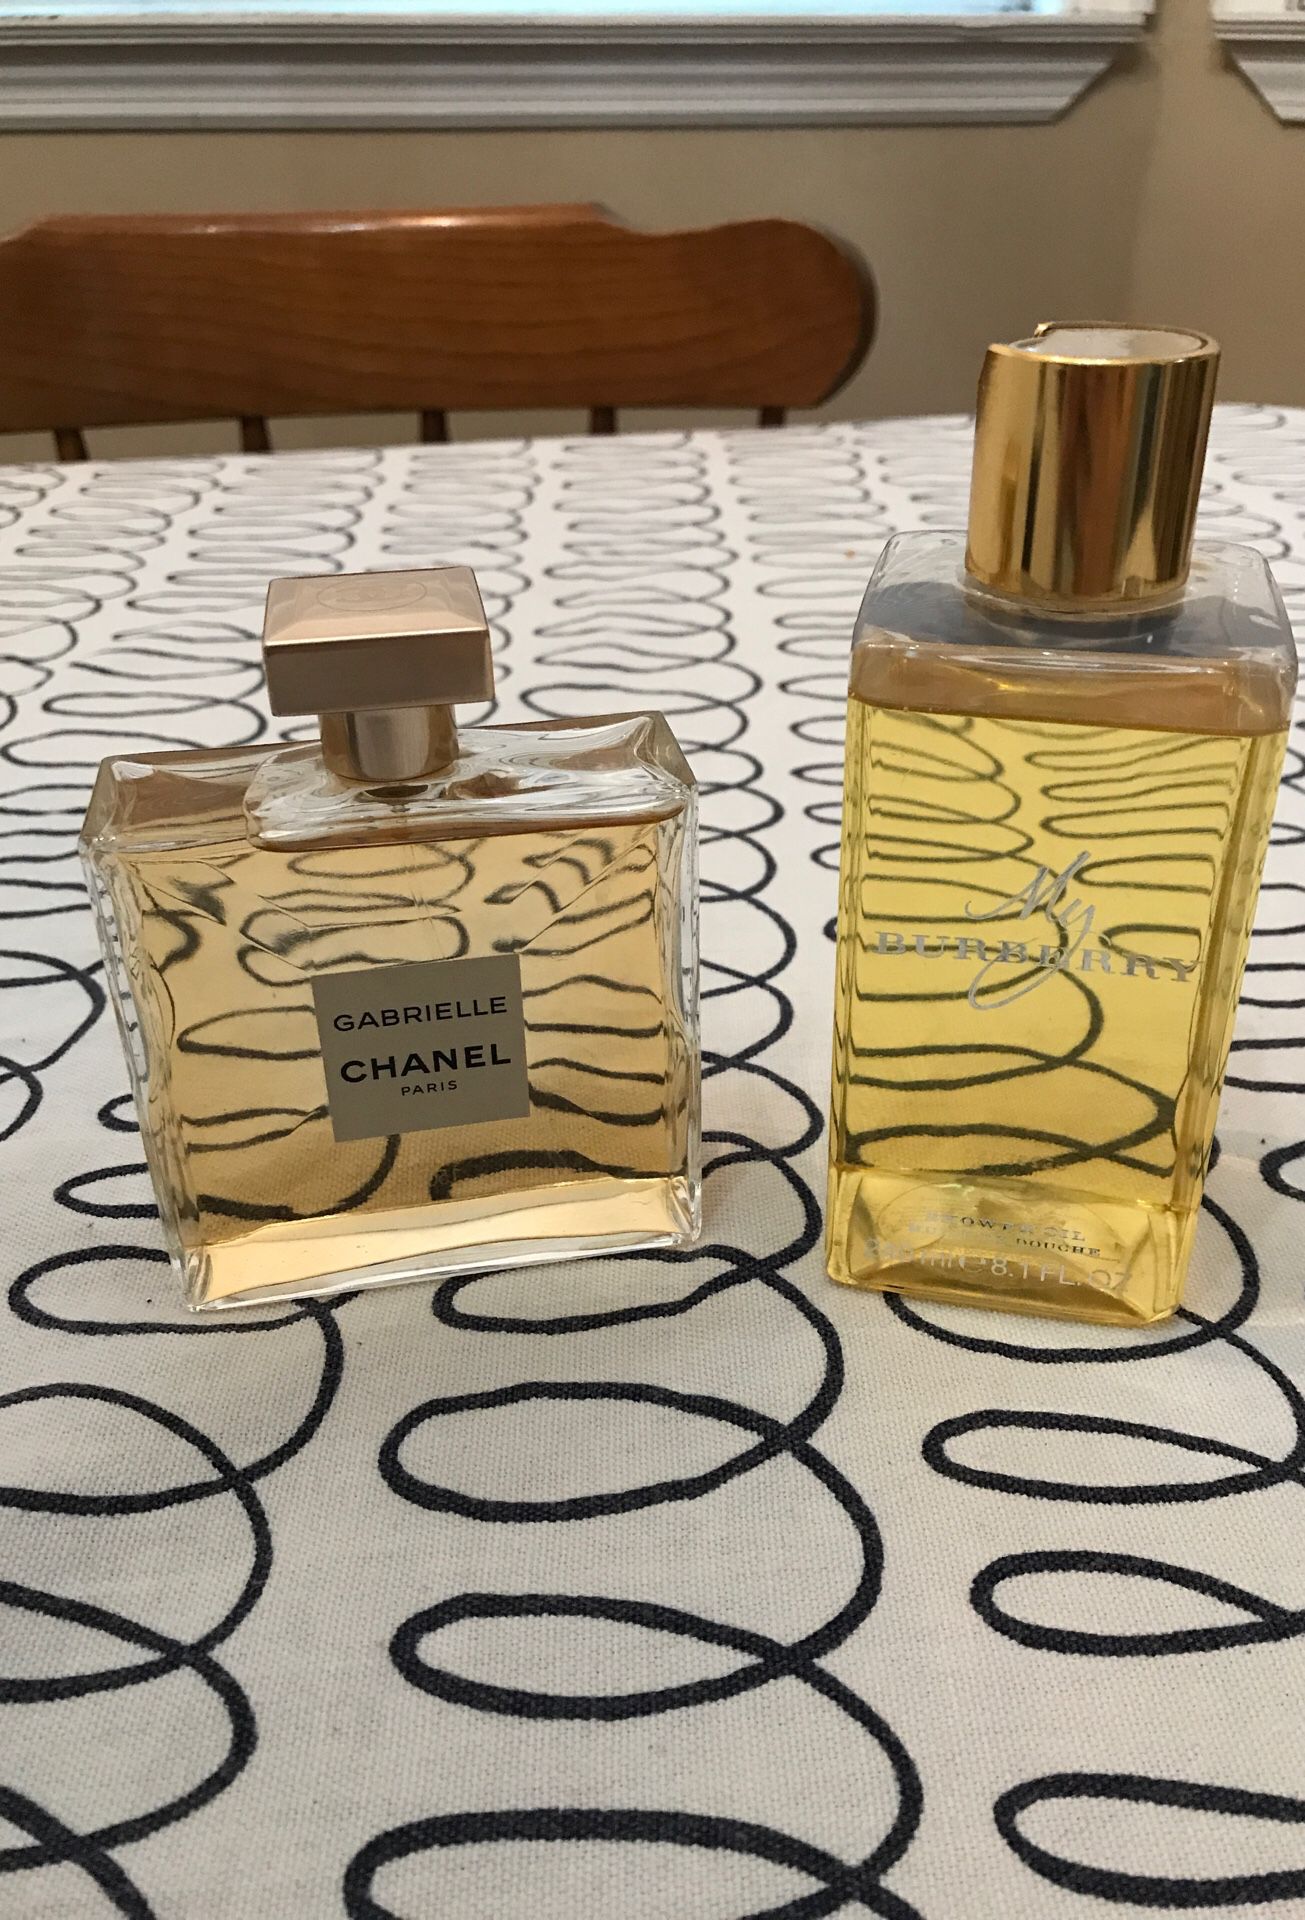 Chanel Gabrielle perfume and My Burberry shower oil